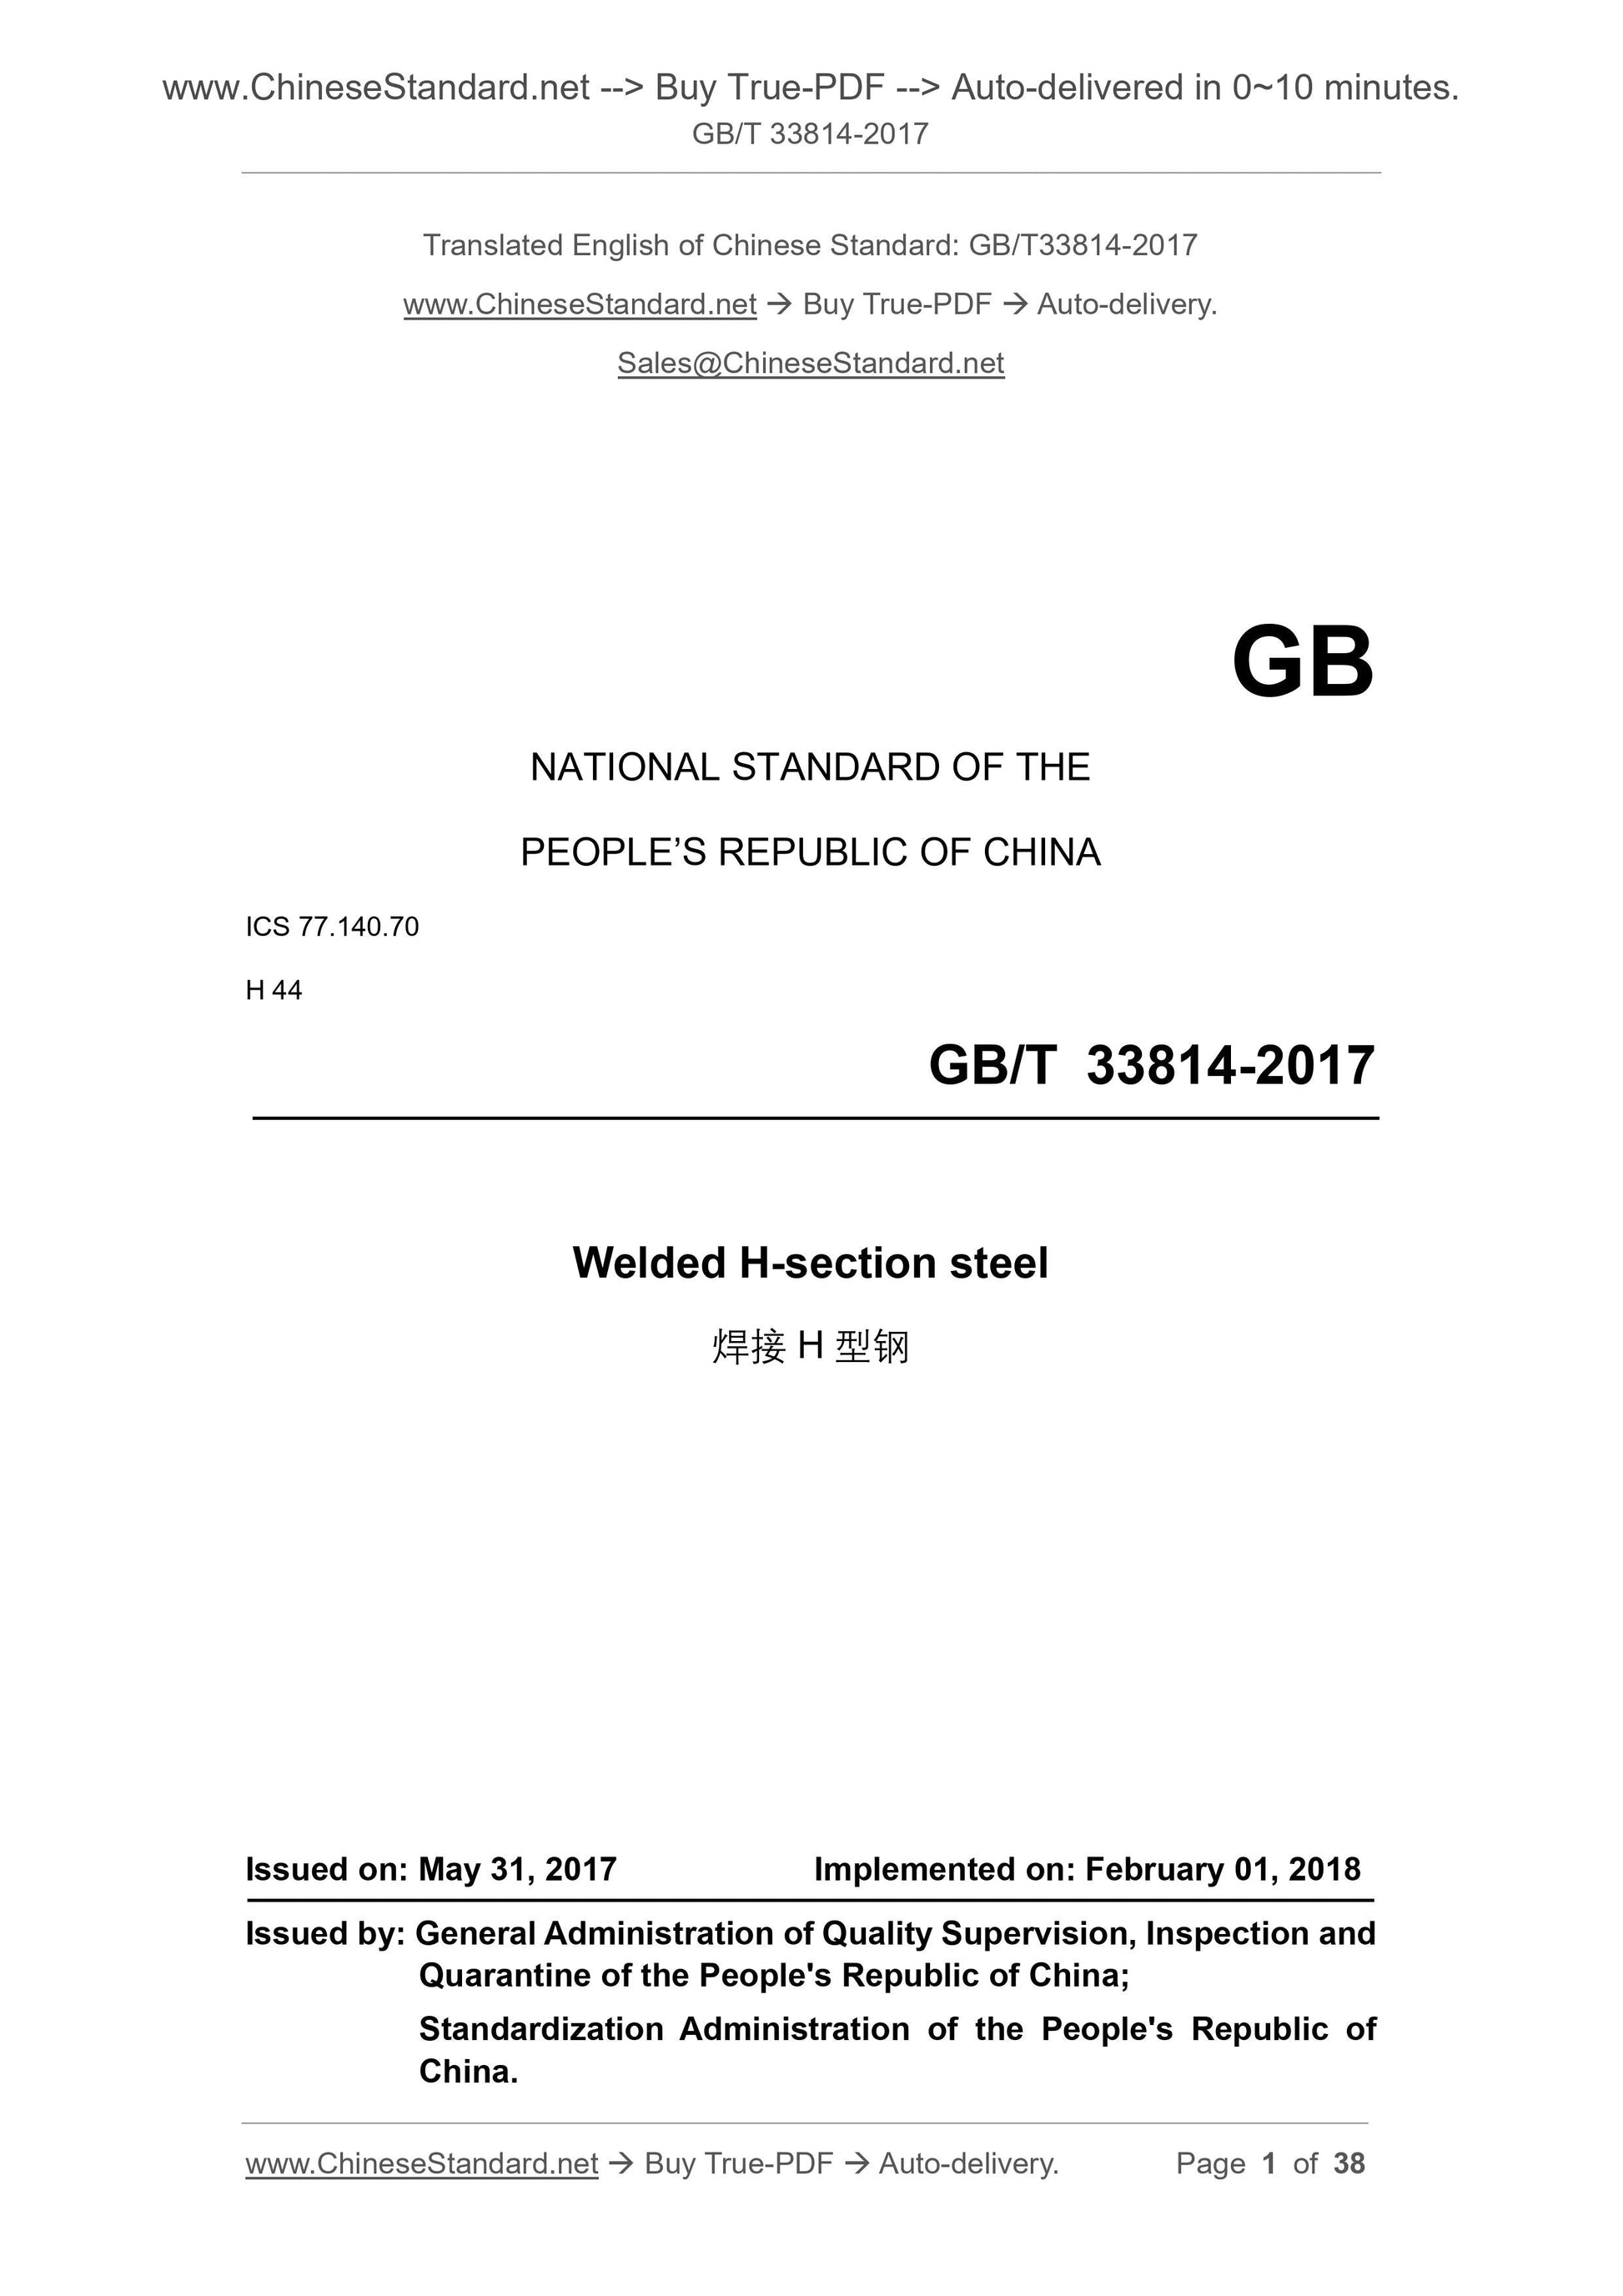 GB/T 33814-2017 Page 1